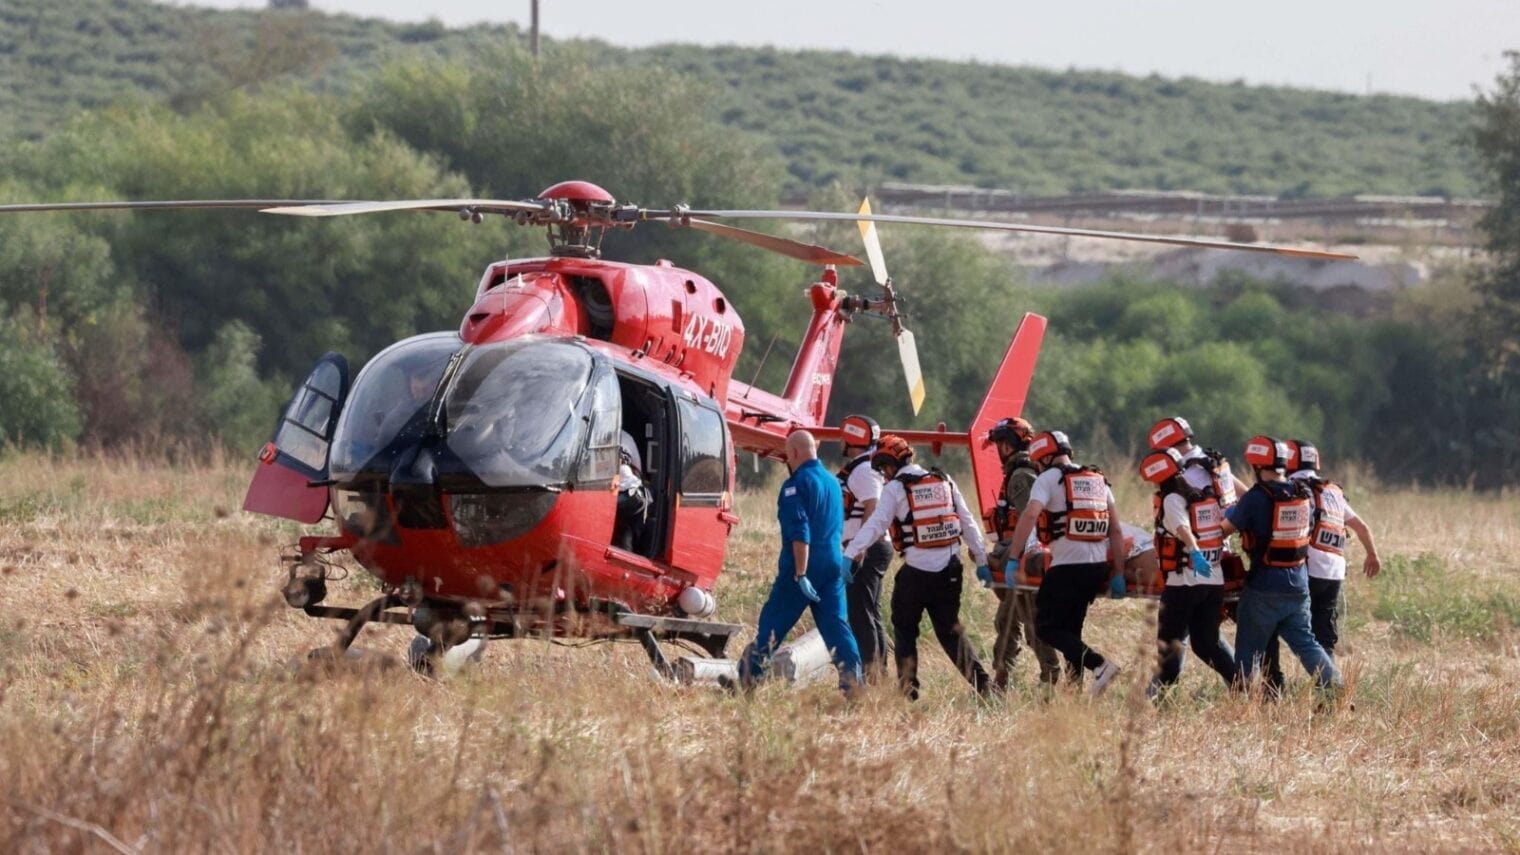 A Magen David Adom helicopter ready to medevac war victims. Photo courtesy of MDA